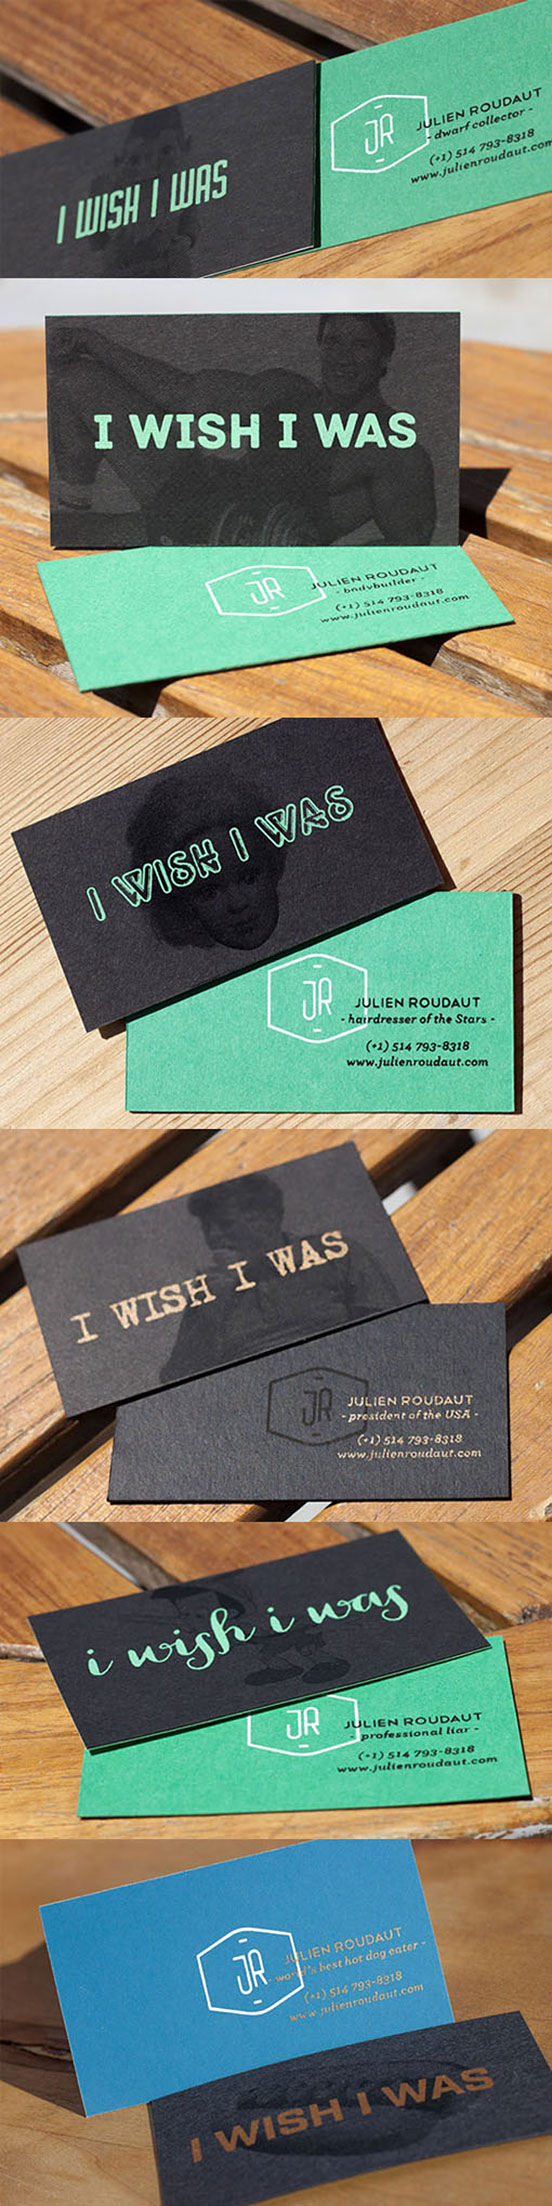 Quirky And Humorous Business Cards